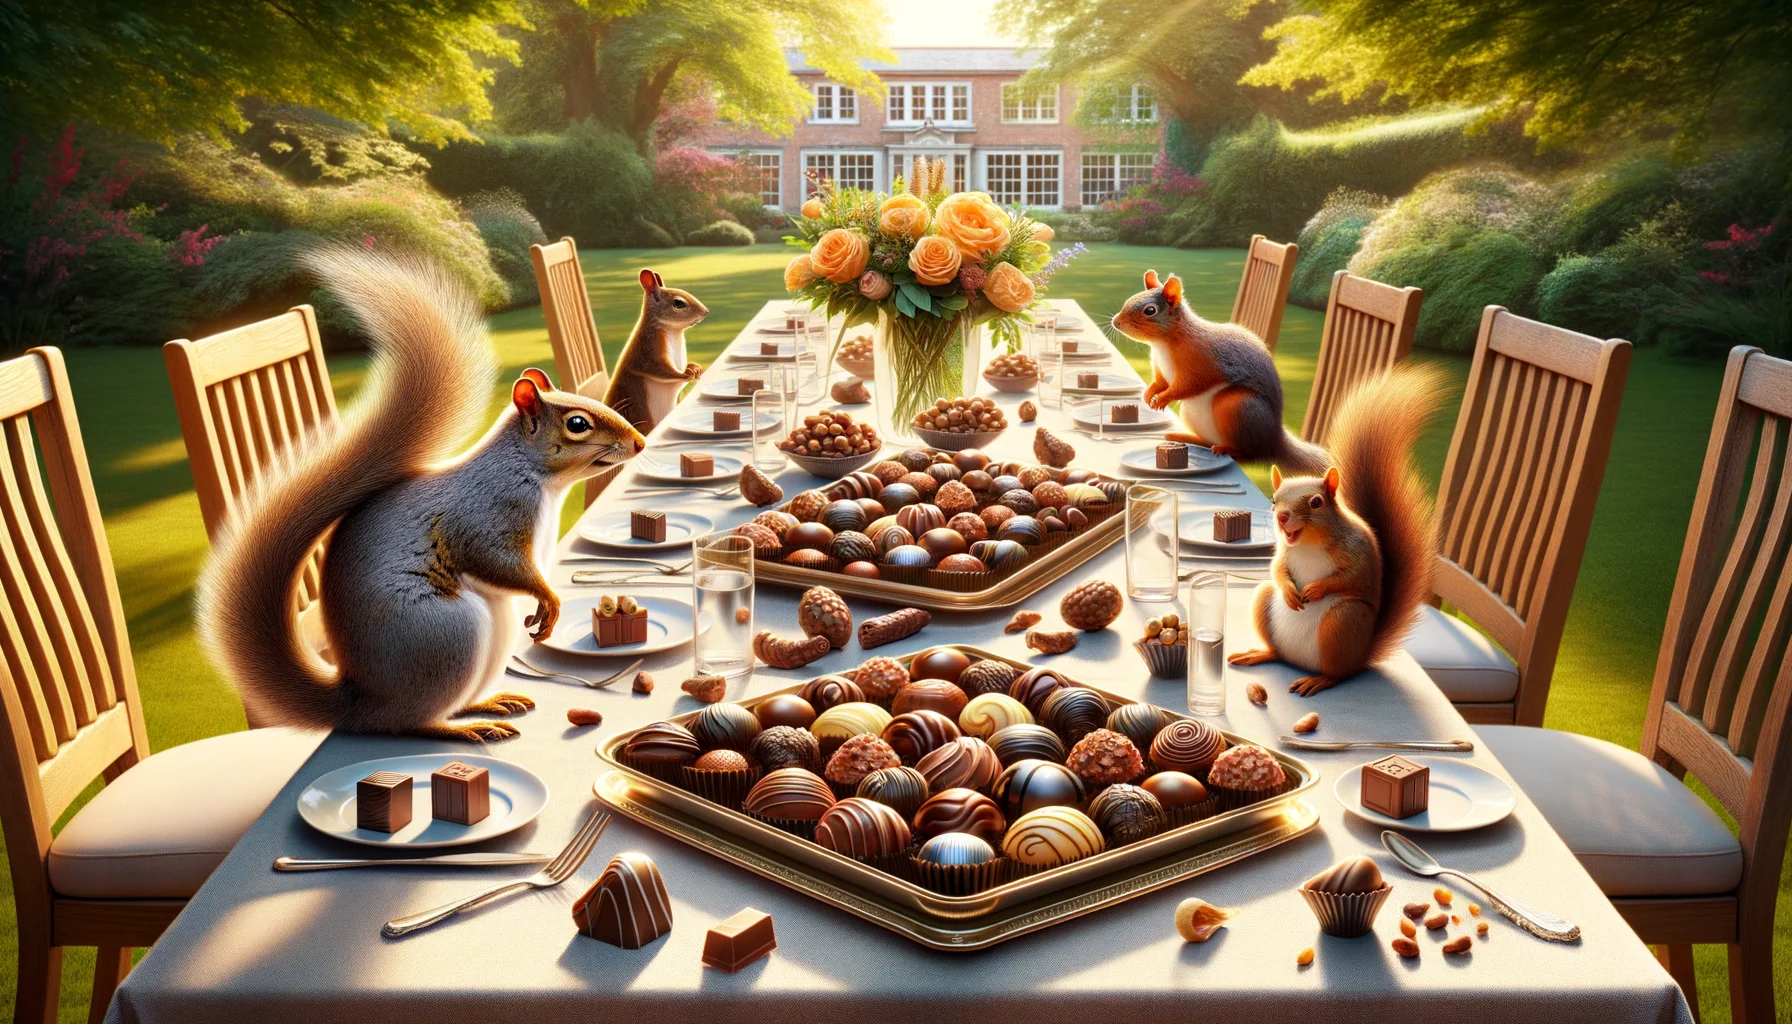 Generate a humorous, high-resolution image that gives the impression of being taken with a superior DSLR camera. It should depict an array of fancy chocolates in an idyllic scene. The chocolates should be meticulously detailed, with a shine indicating their rich smoothness, arranged interestingly. The setting could be a luxurious dining table set outdoors on a bright sunny day. A backdrop of lush greenery adding freshness to the indulgence. Unexpected guests, like a squirrel and a bird, eyeing the chocolates with evident curiosity, add a humorous touch to the scenario.